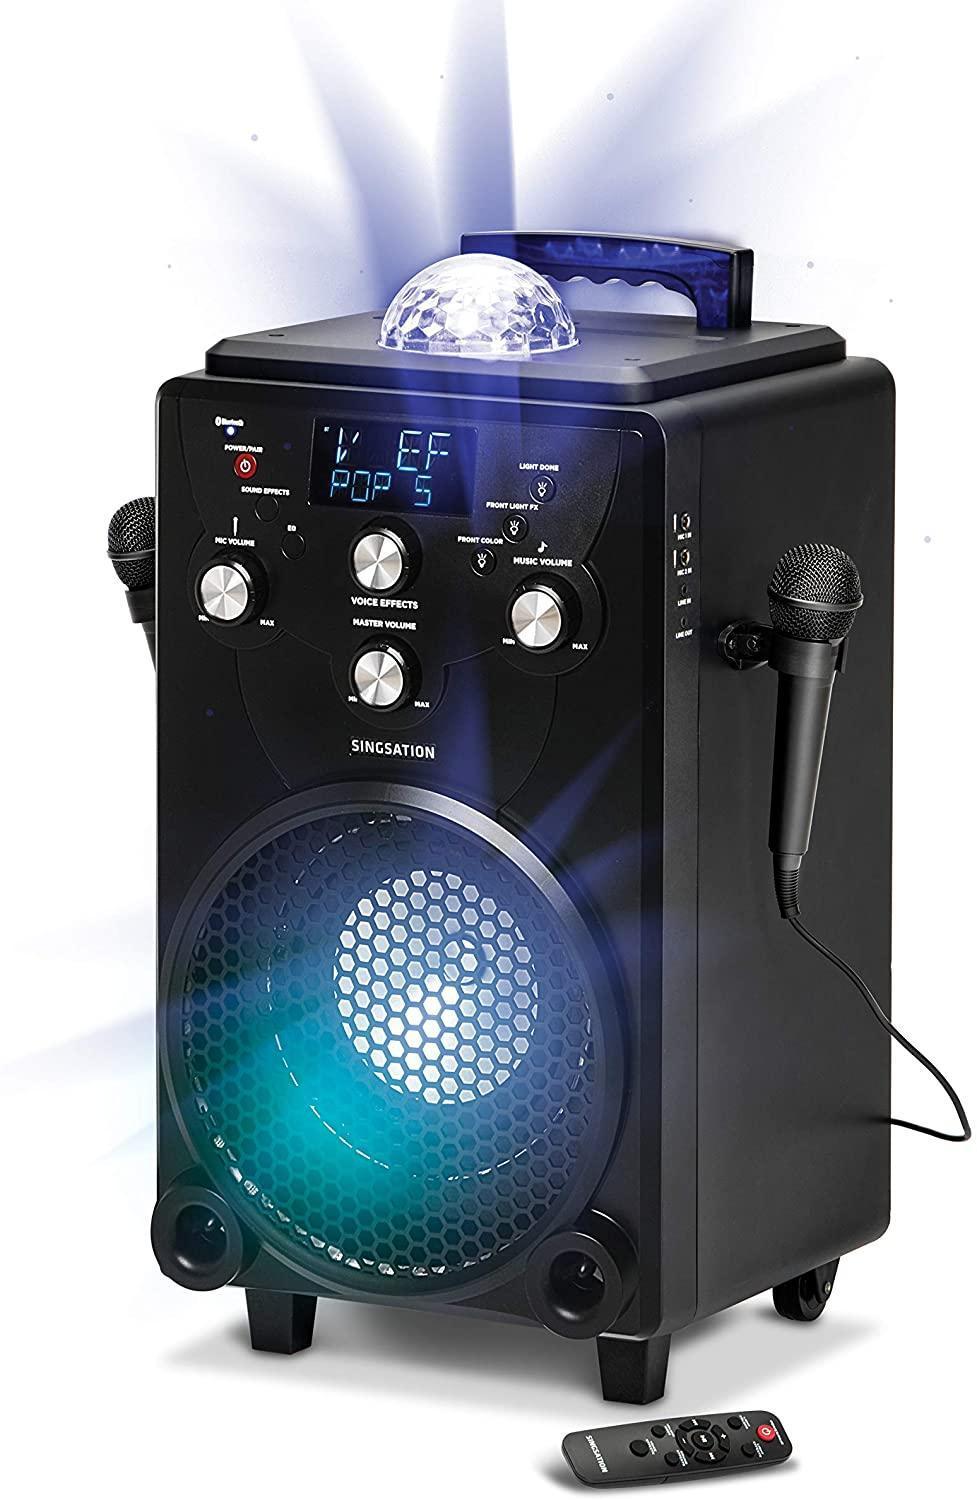 808 Professional Karaoke Machine for Adults and Kids - Singsation XL Portable - $219.50 MSRP